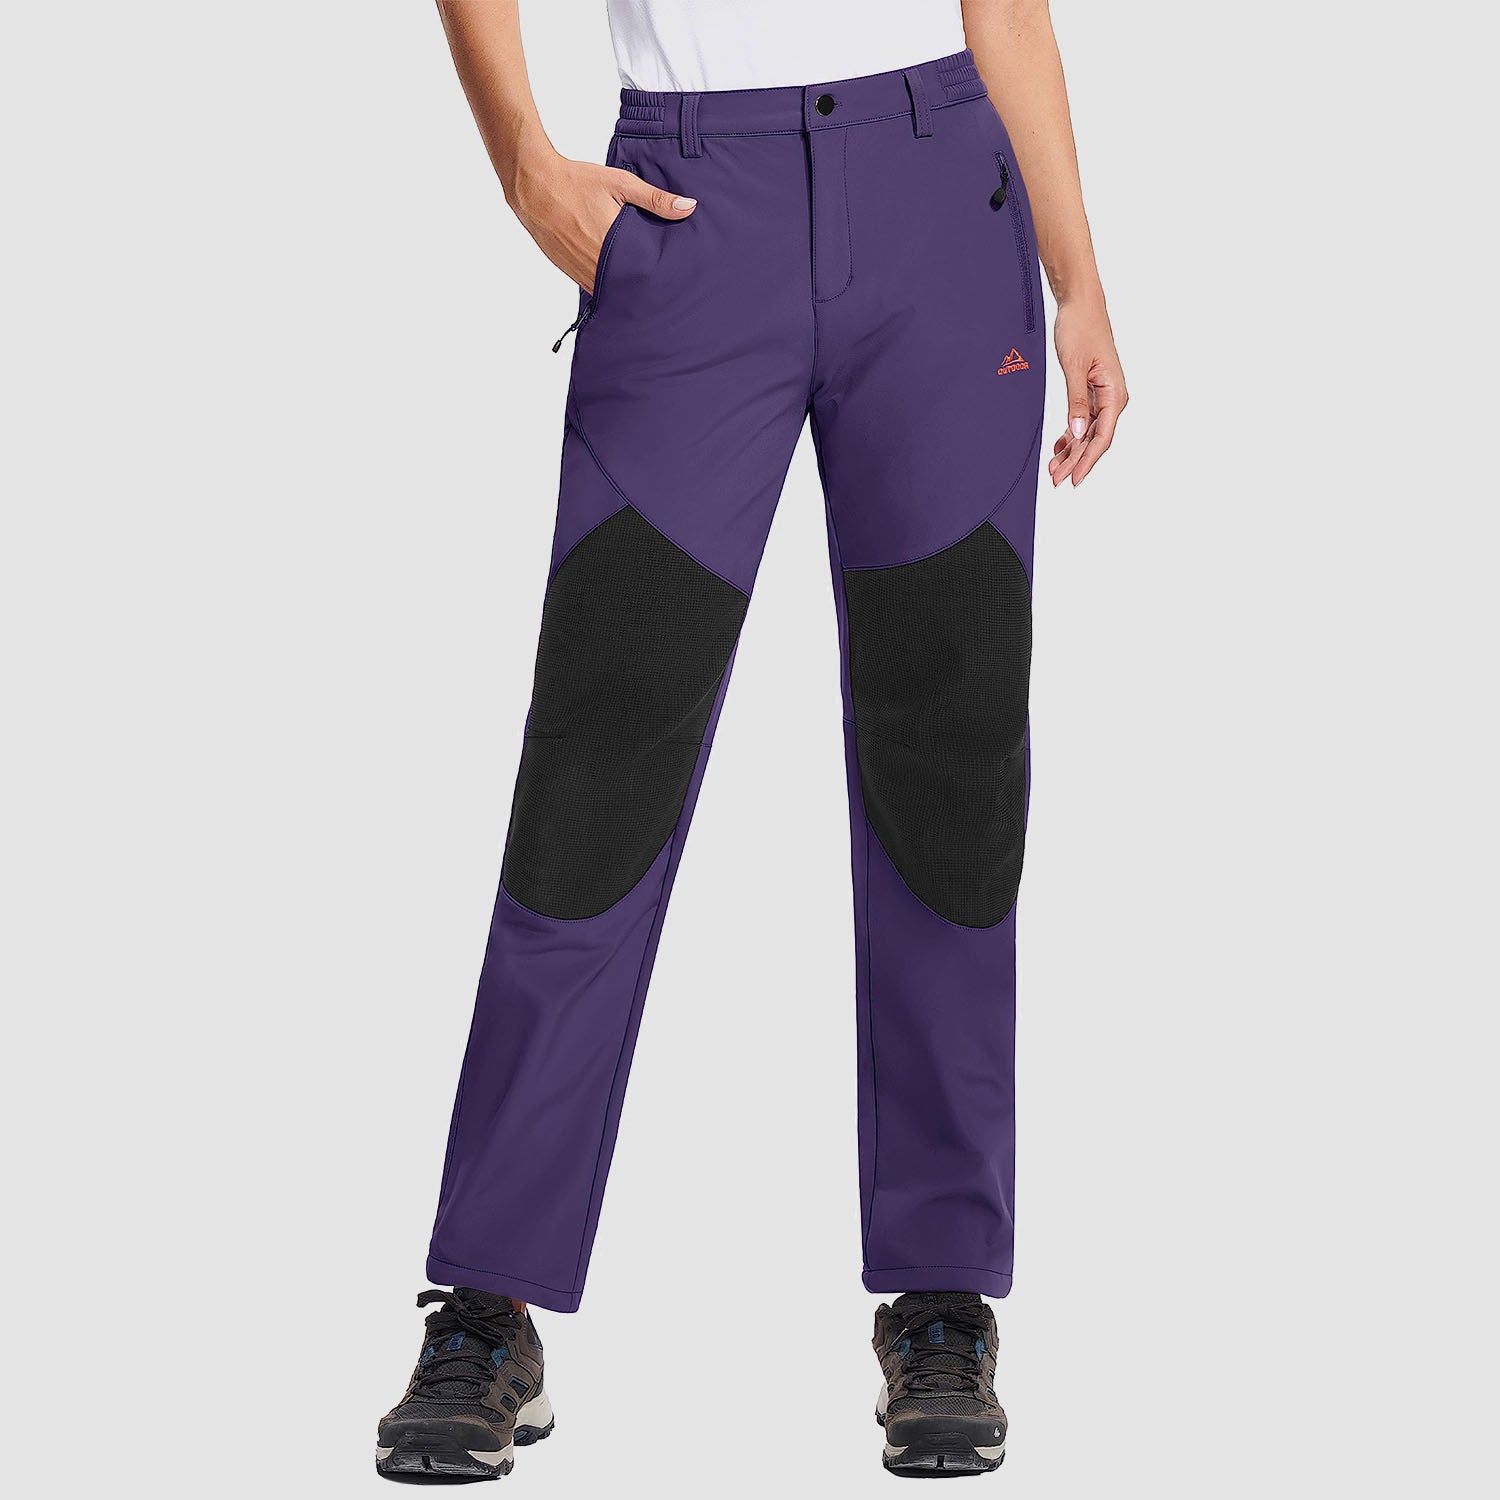 https://magcomsen.com/cdn/shop/files/Women_s-Hiking-Pants-Fleece-Lined-Warm-Pant-with-Articulated-Knee-Water-Resistant-Softshell-Outdoor-Snow-Ski_15.jpg?v=1690353525&width=1500